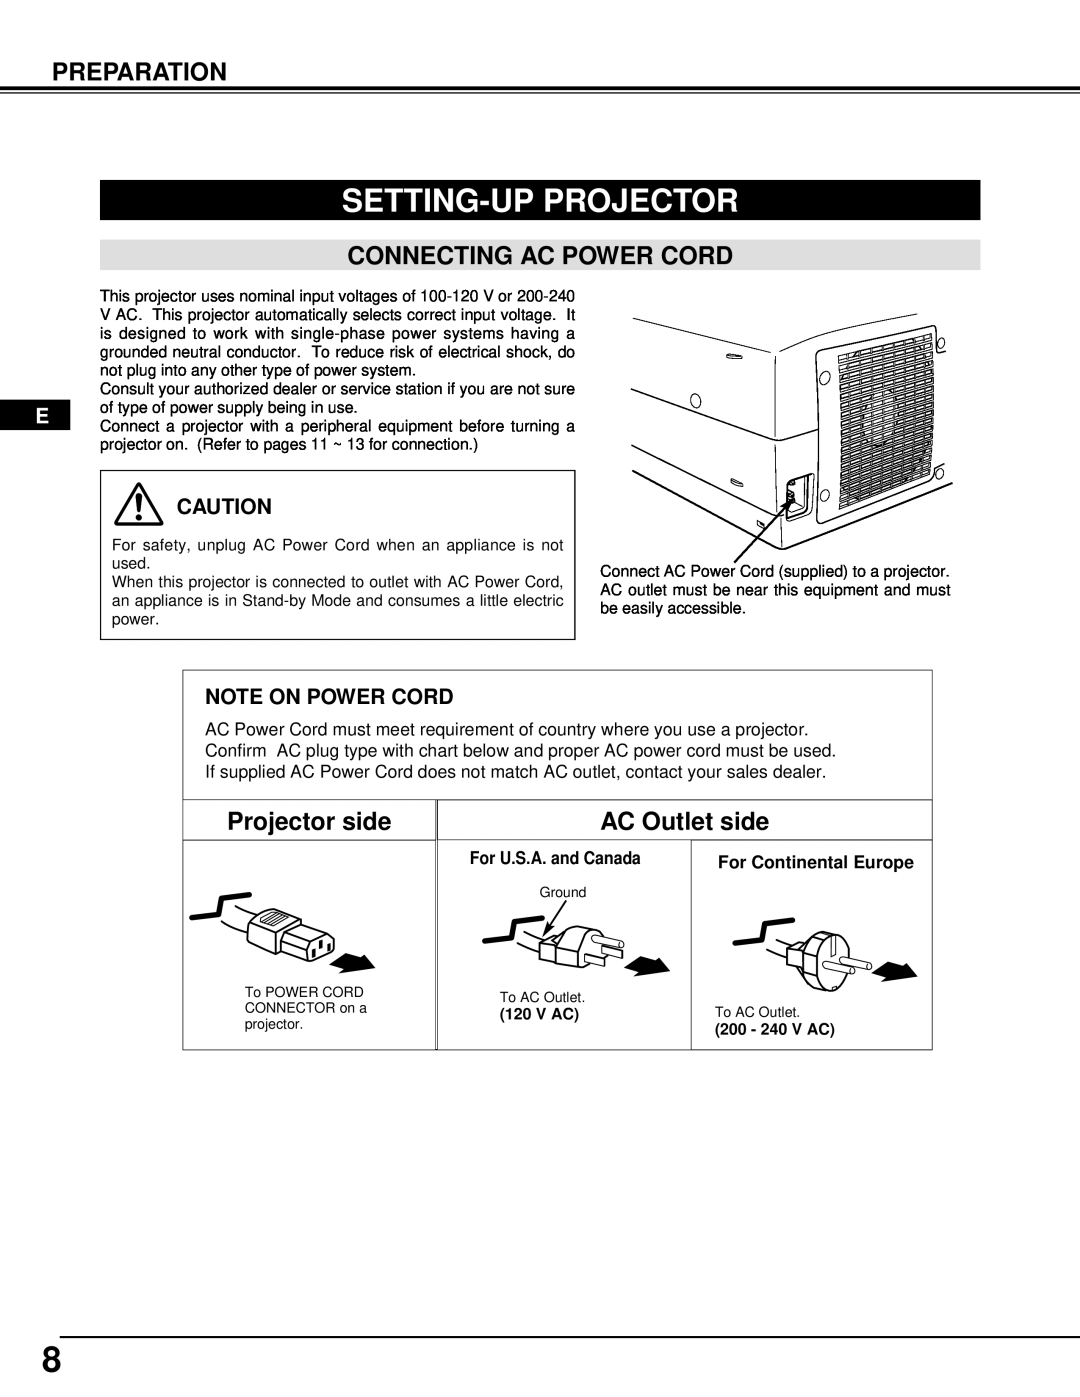 InFocus DP9295 manual Setting-Up Projector, Preparation, Connecting Ac Power Cord, Projector side, AC Outlet side, V Ac 